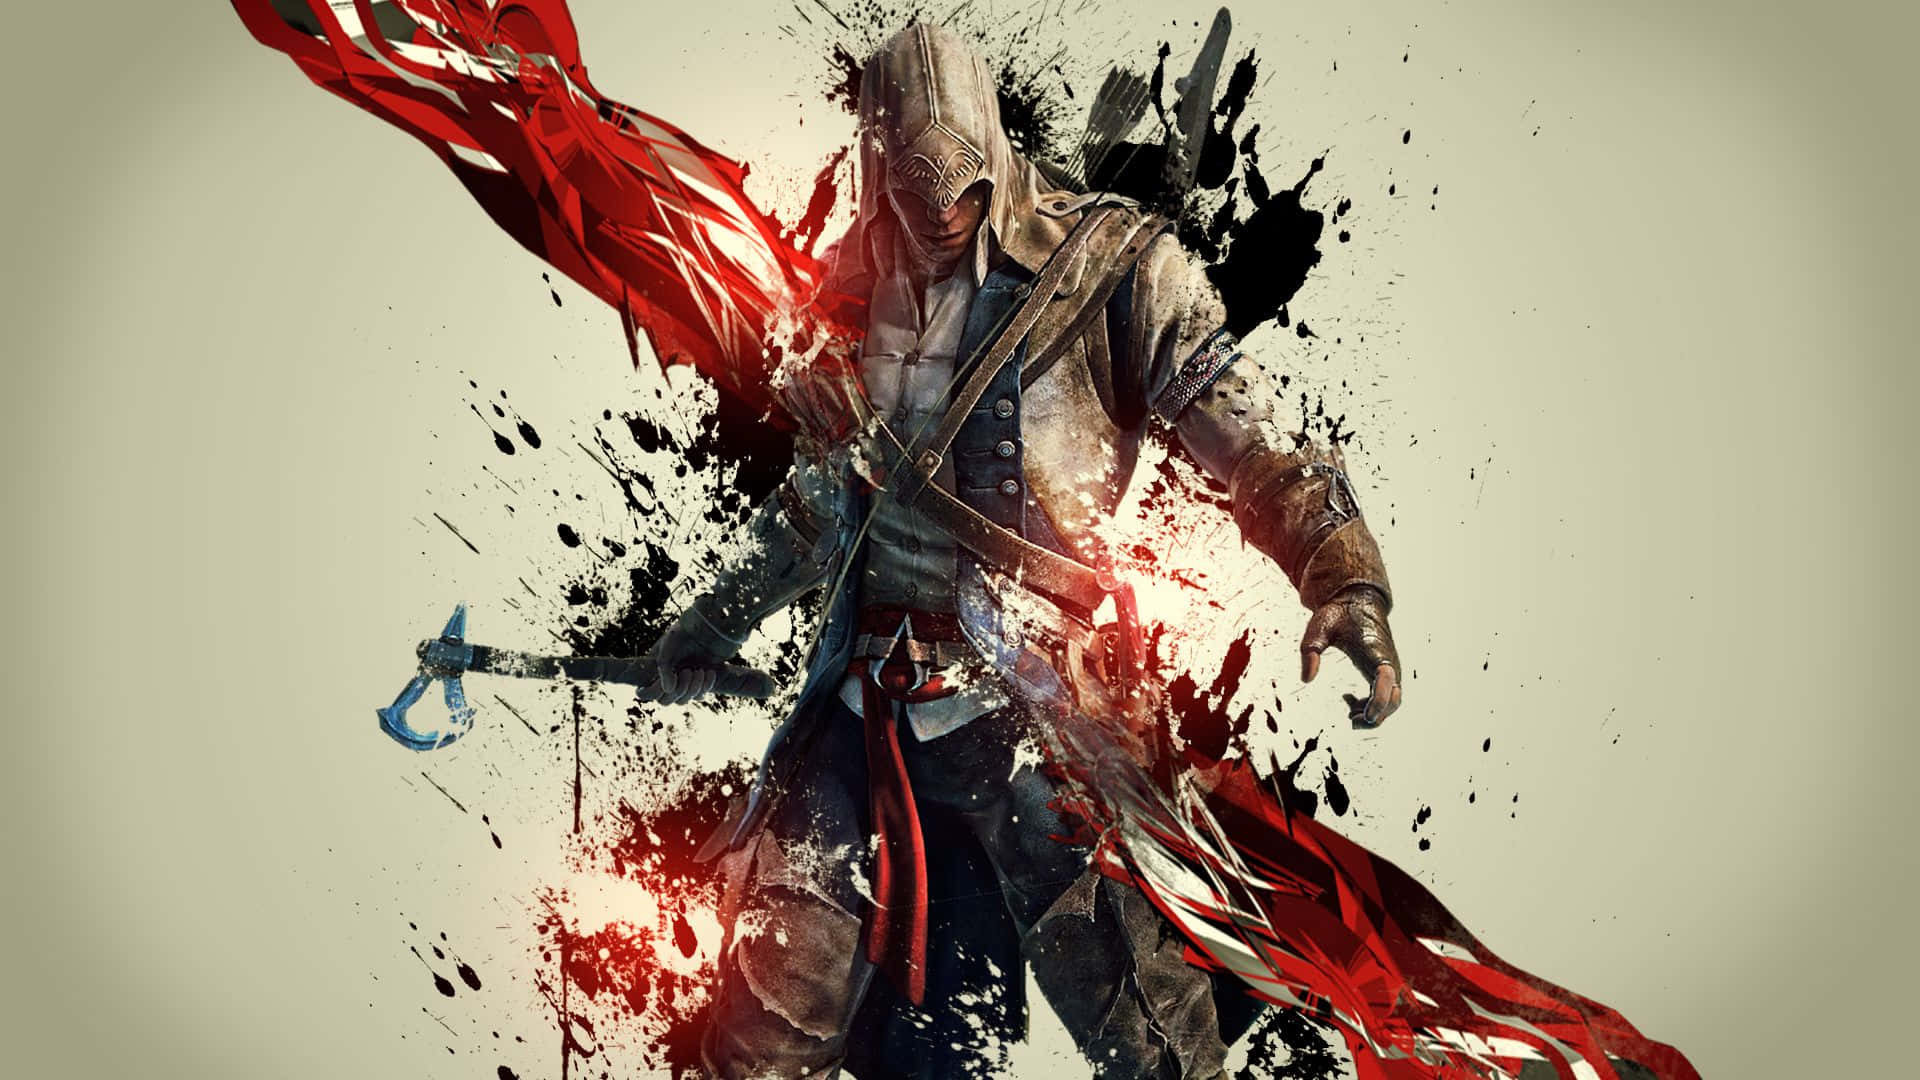 Assassin Creed Wallpapers